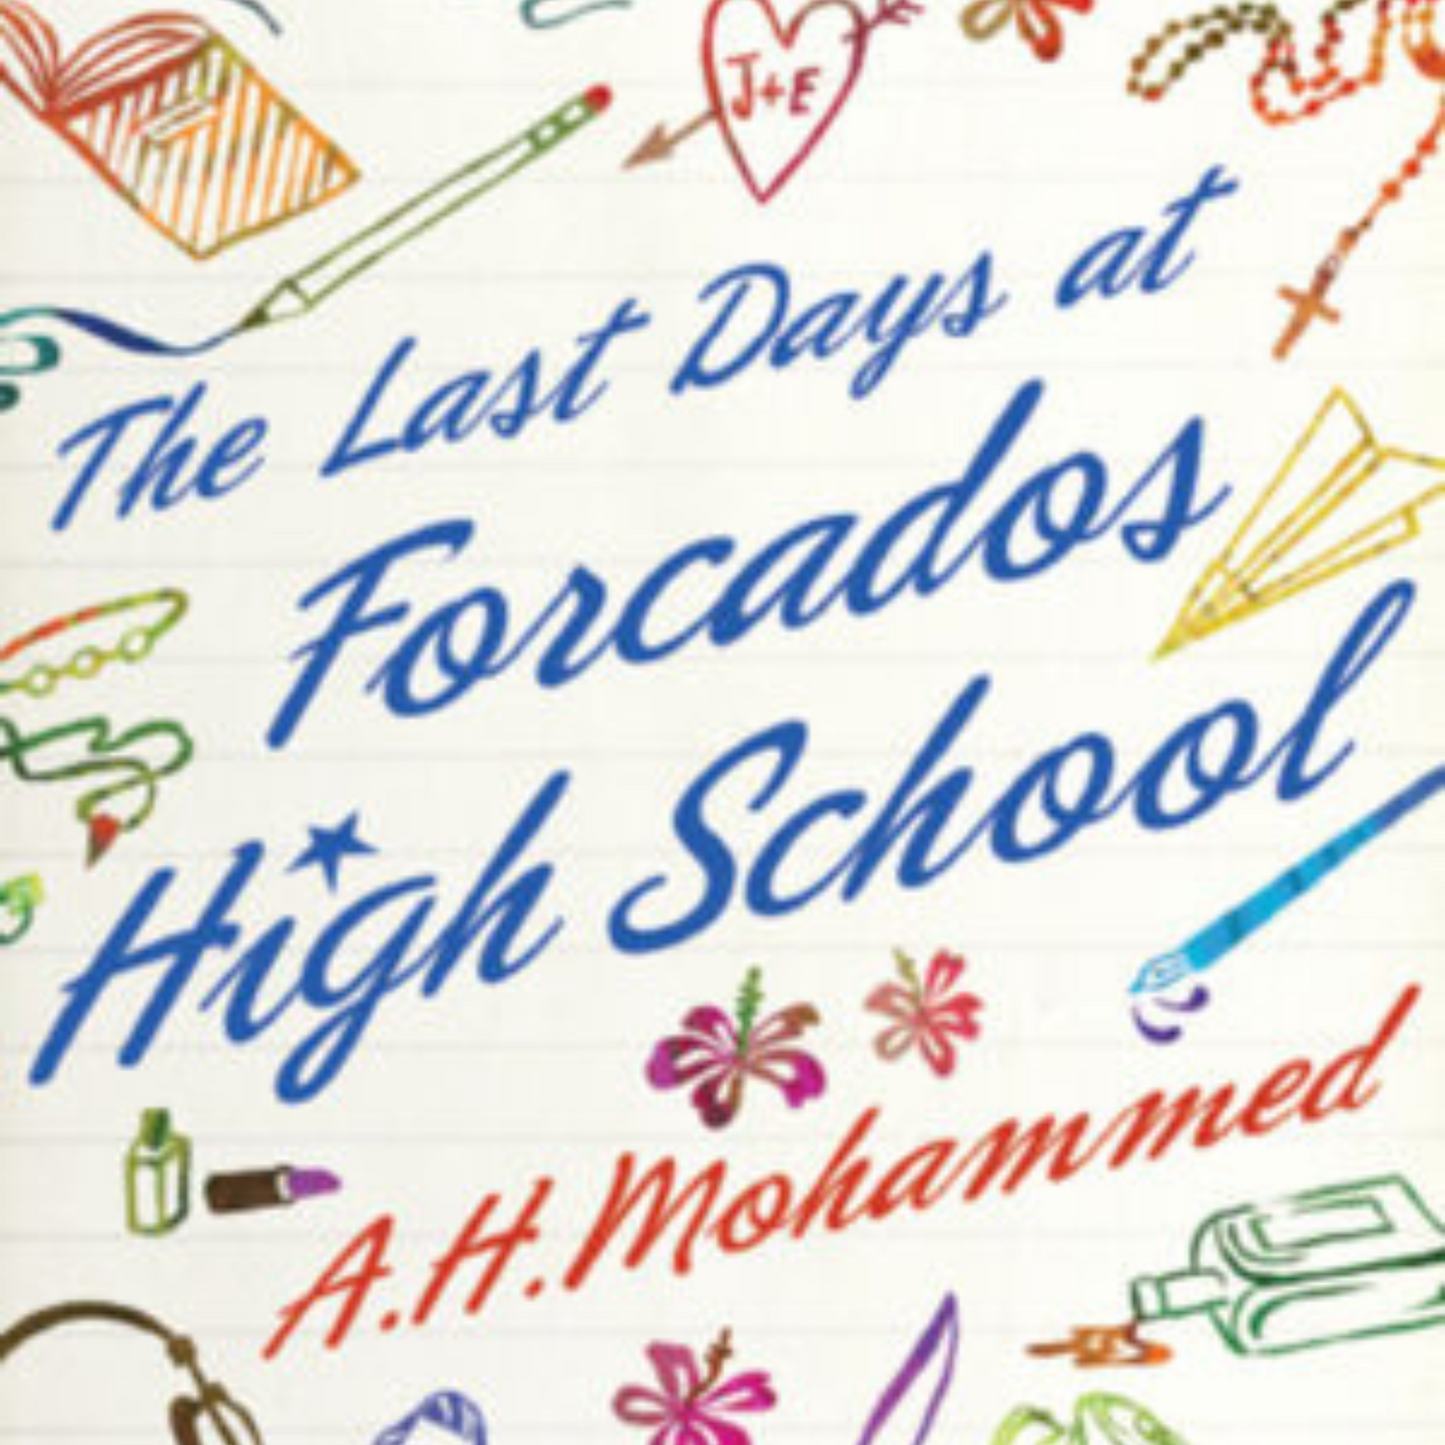 The last days of Forcados High School